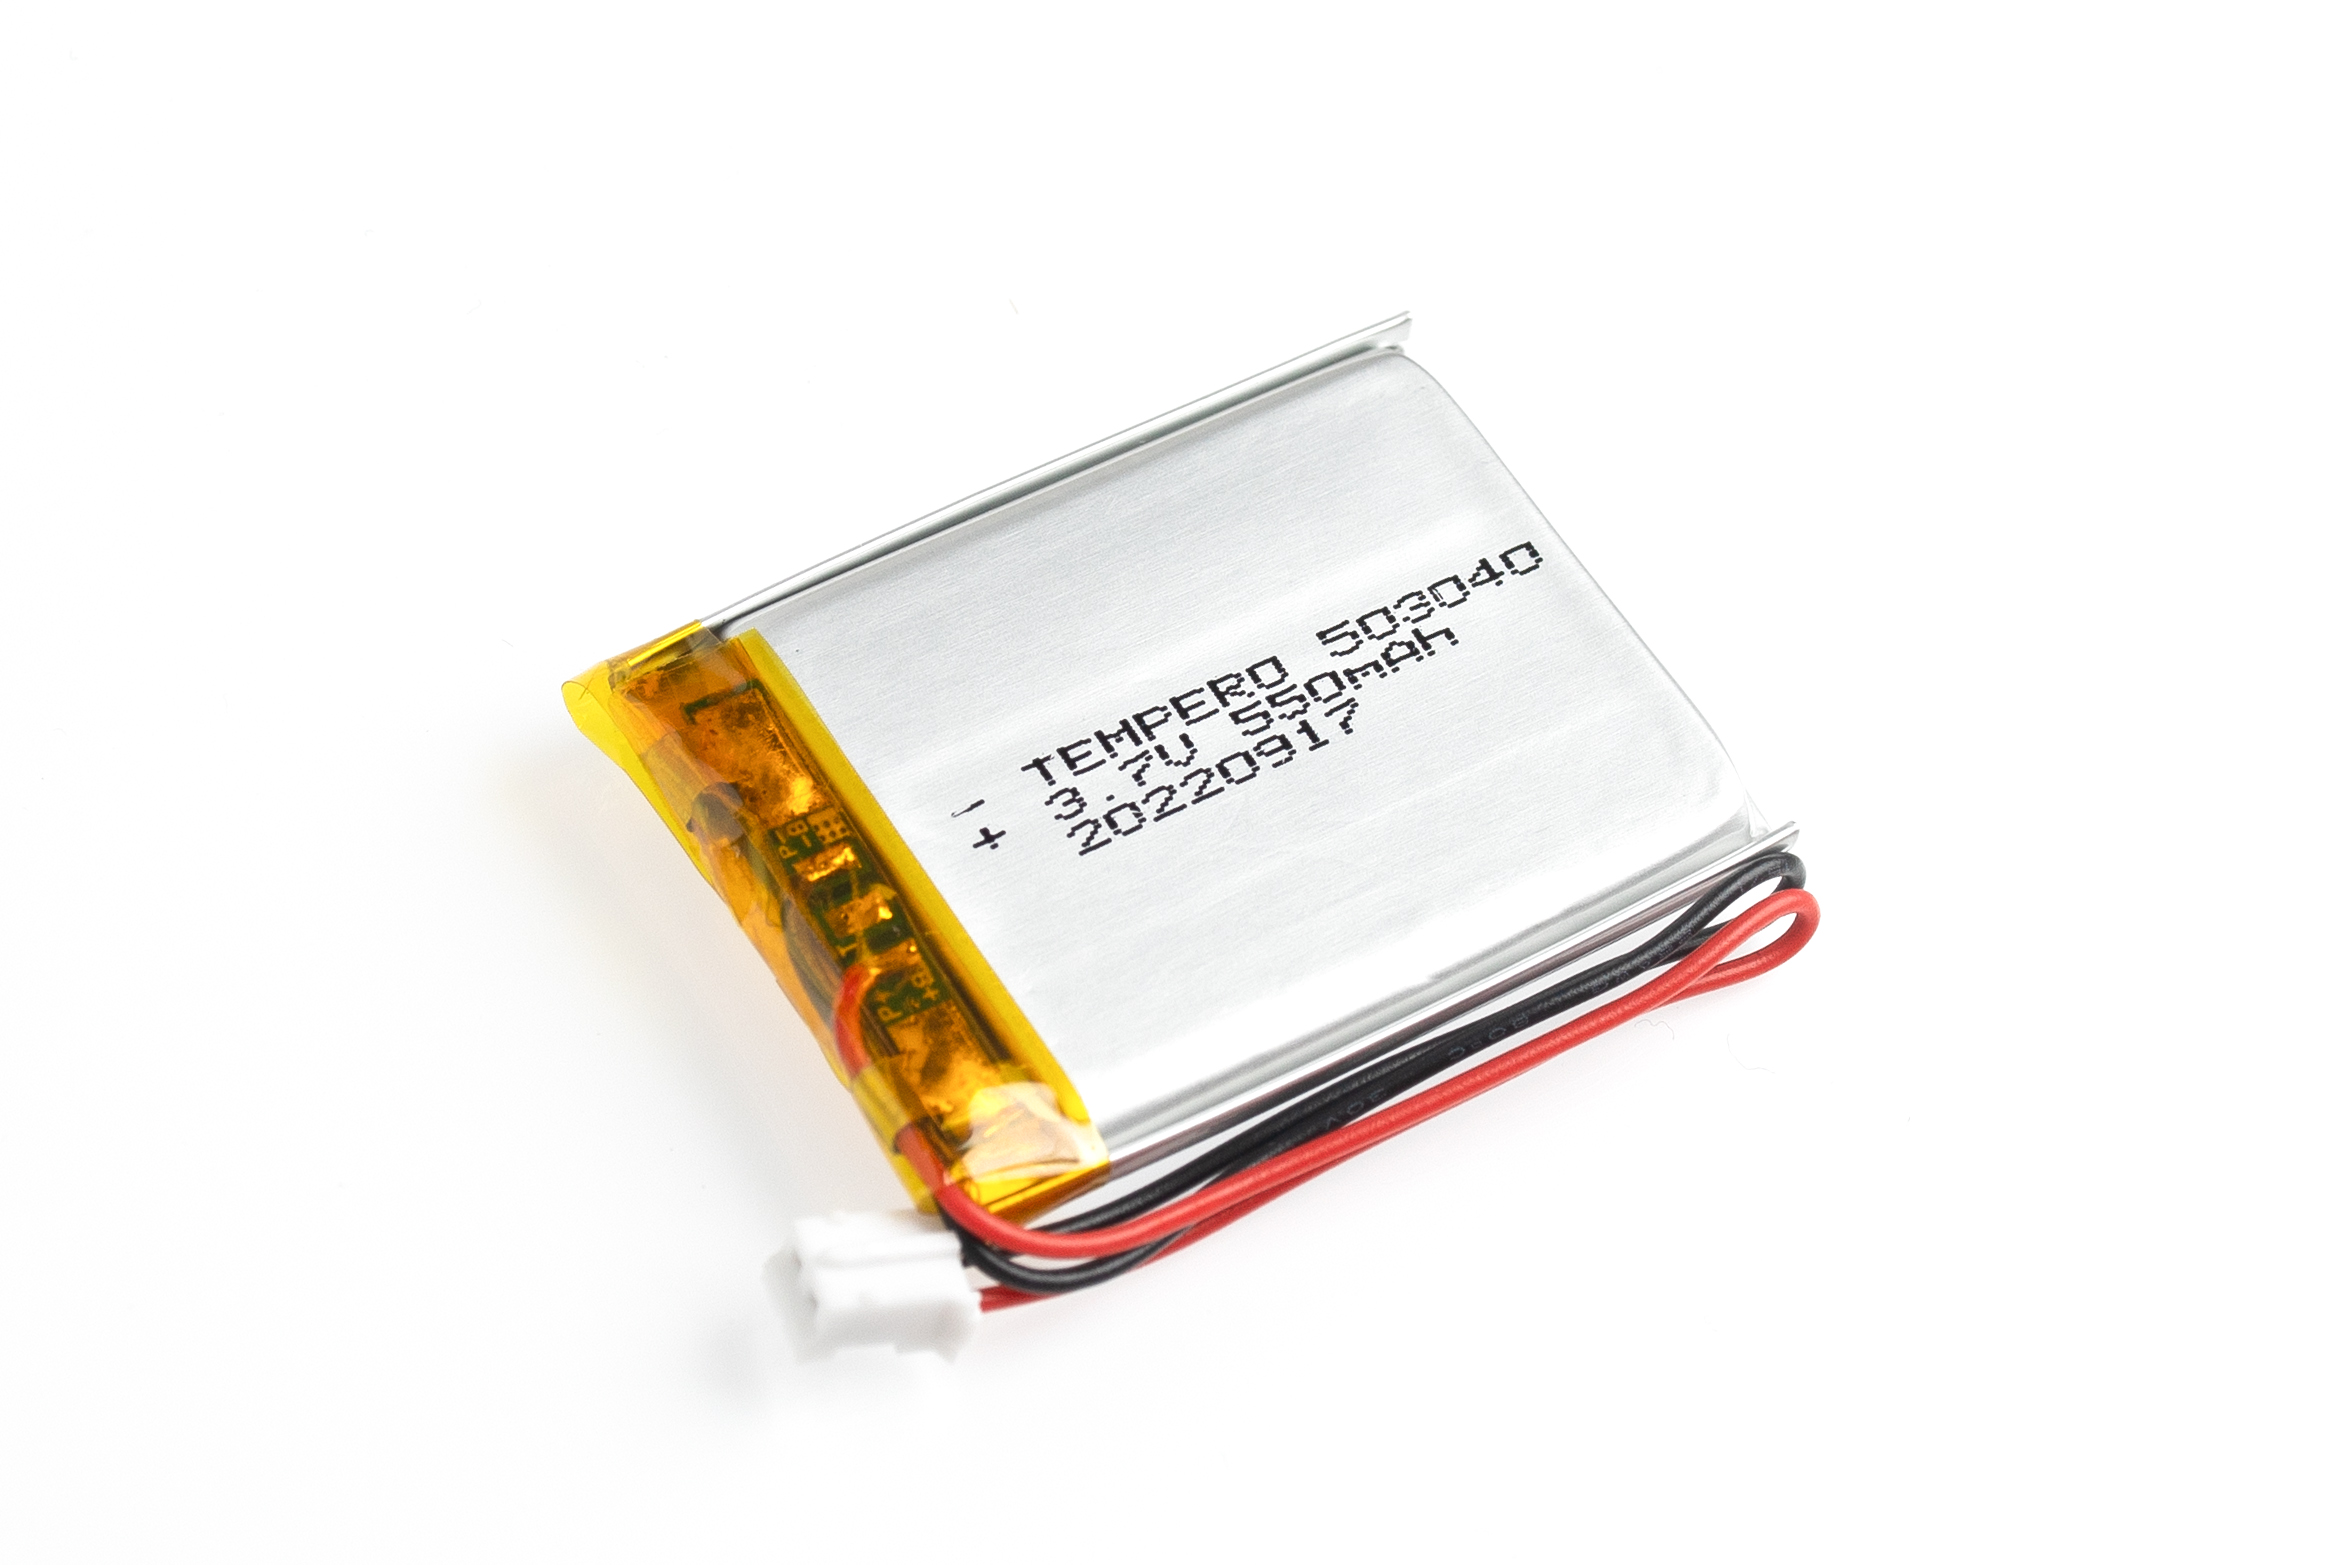 503040 Lithium ion polymer Battery lithium polymer